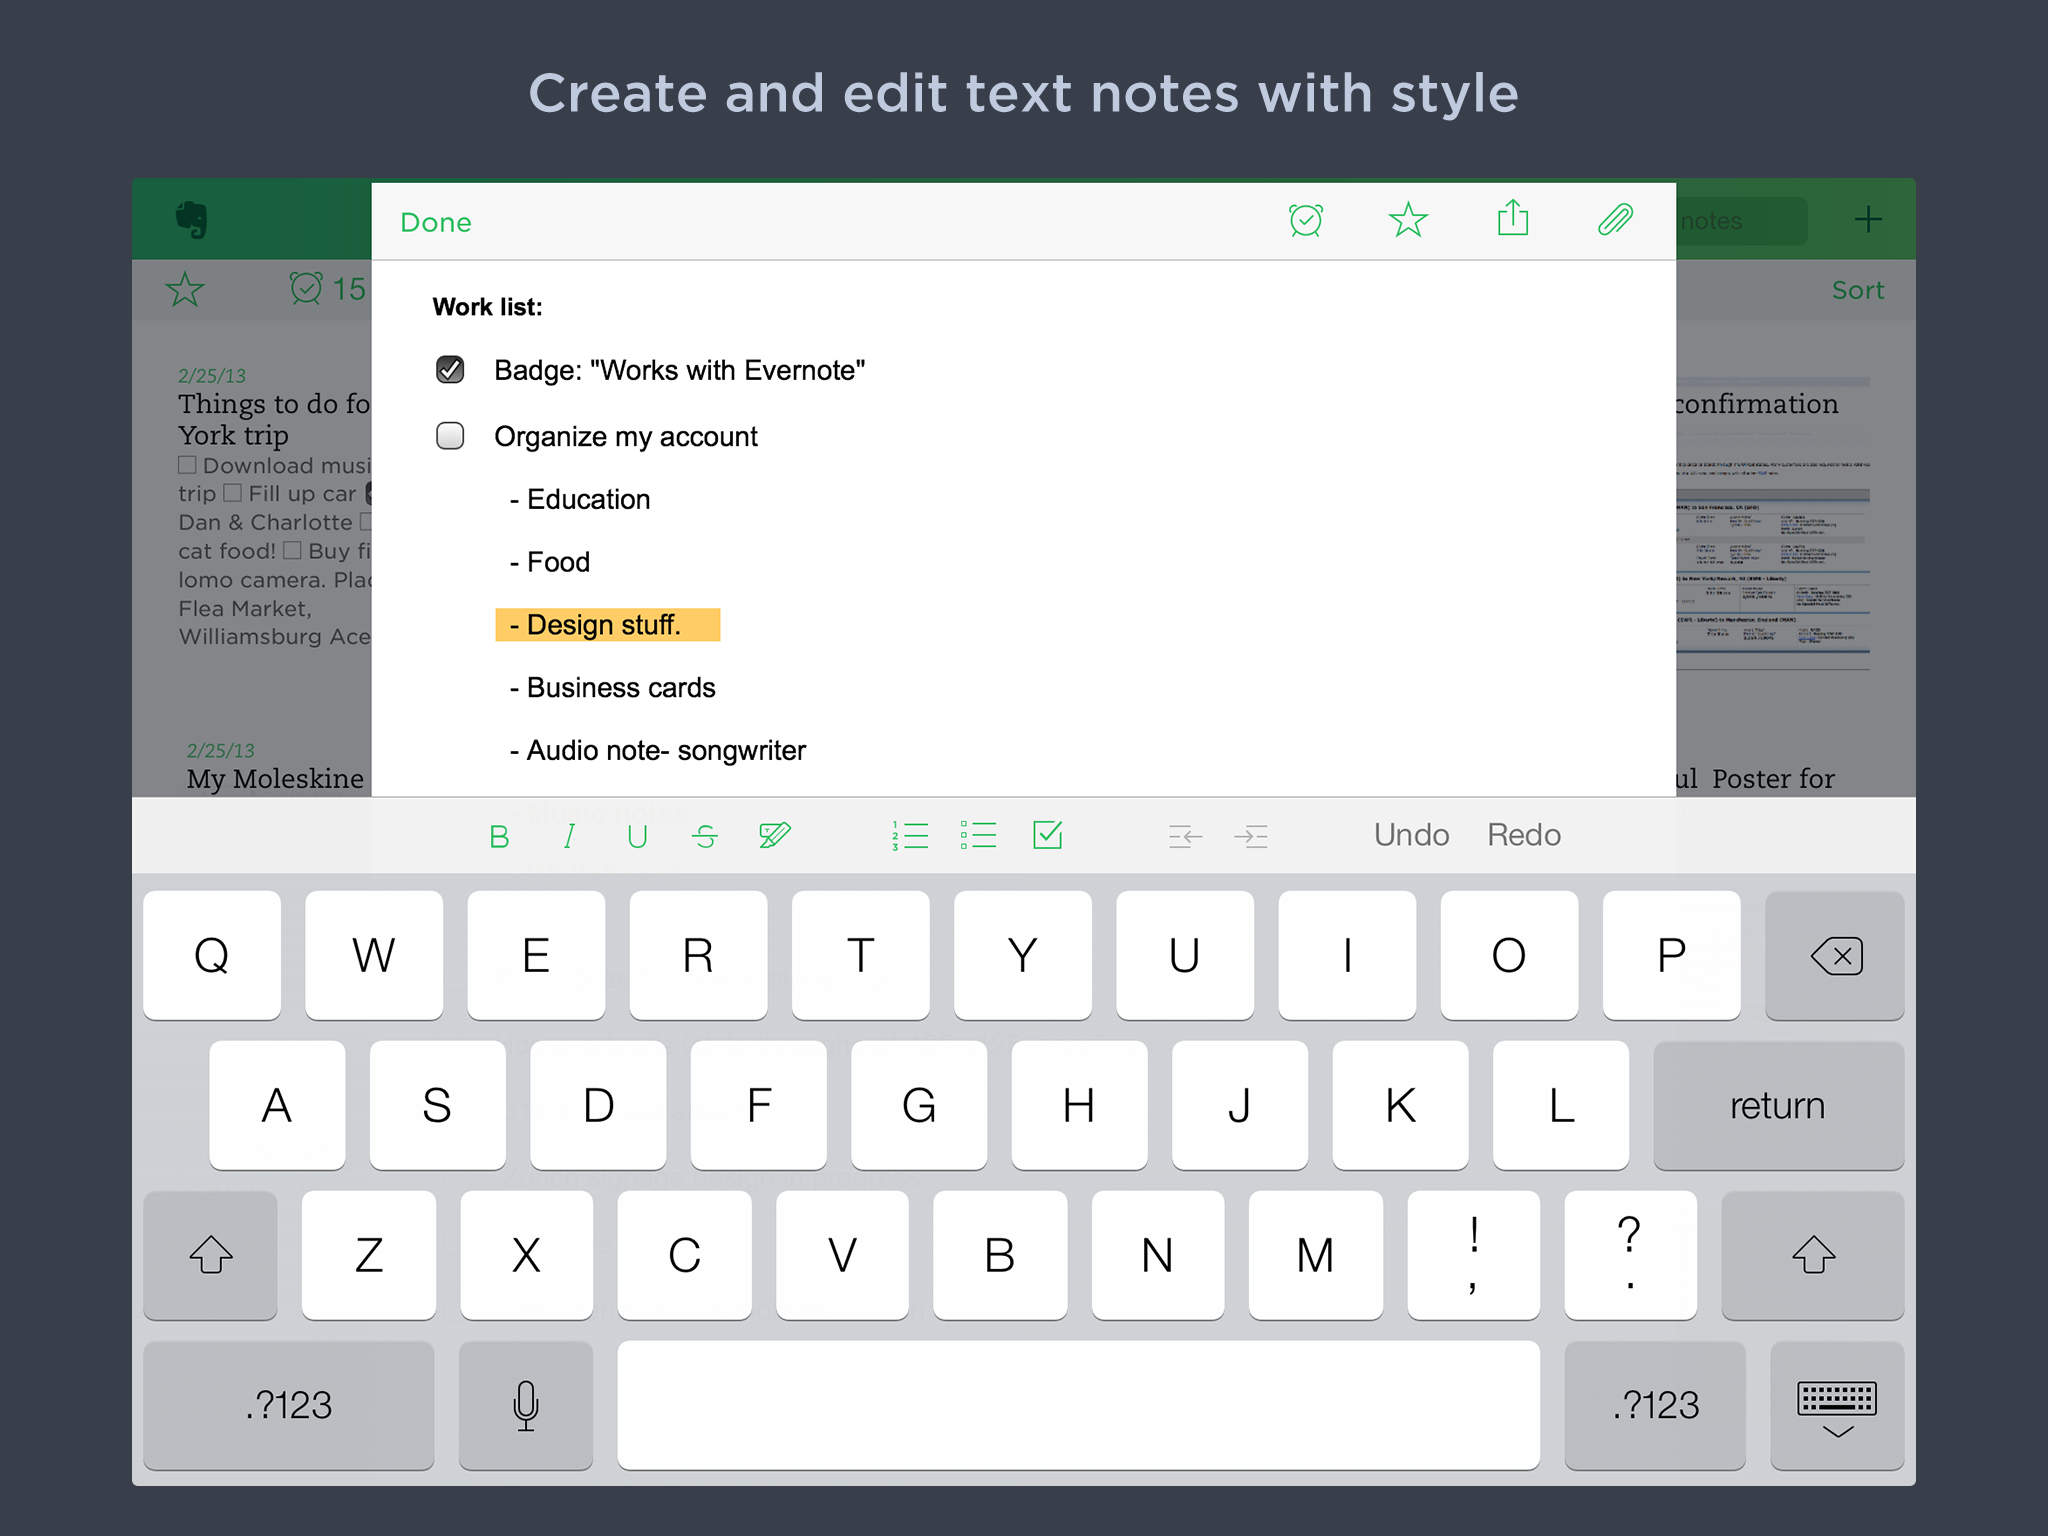 Evernote Releases Completely Redesigned App for iOS 7, Brings AirDrop Support and More